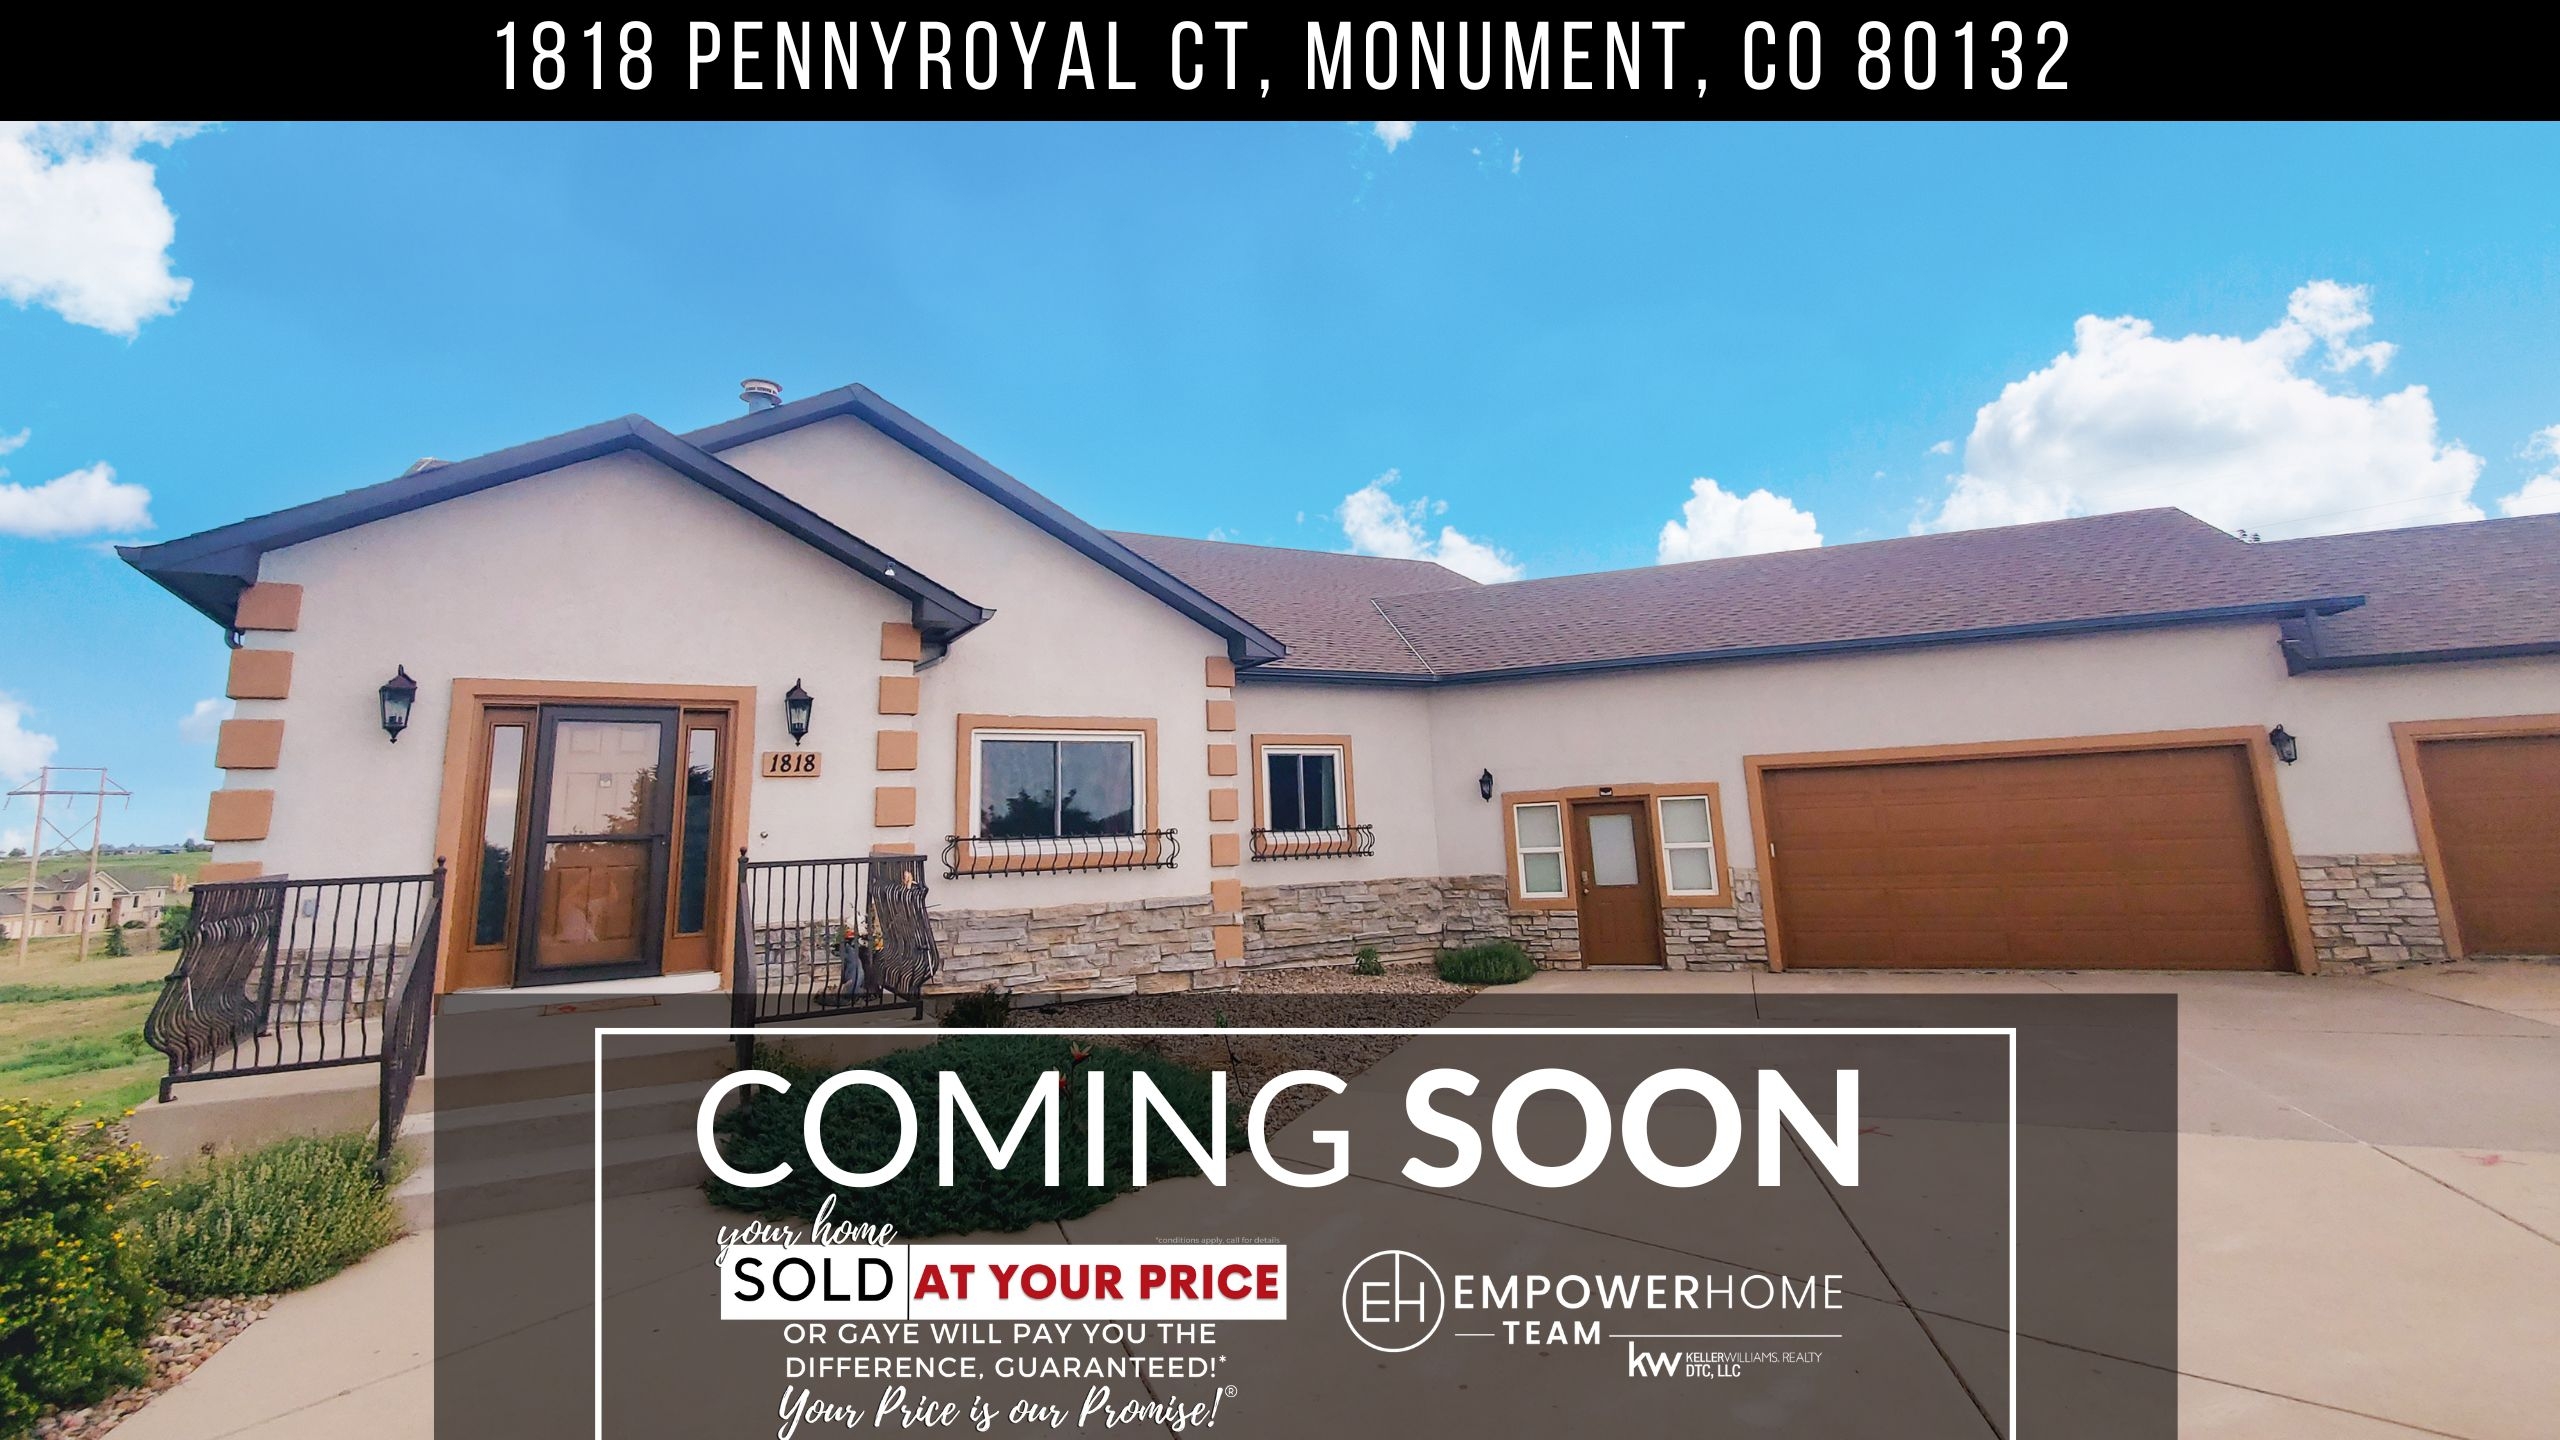 1818 Pennyroyal Ct, Monument, CO 80132